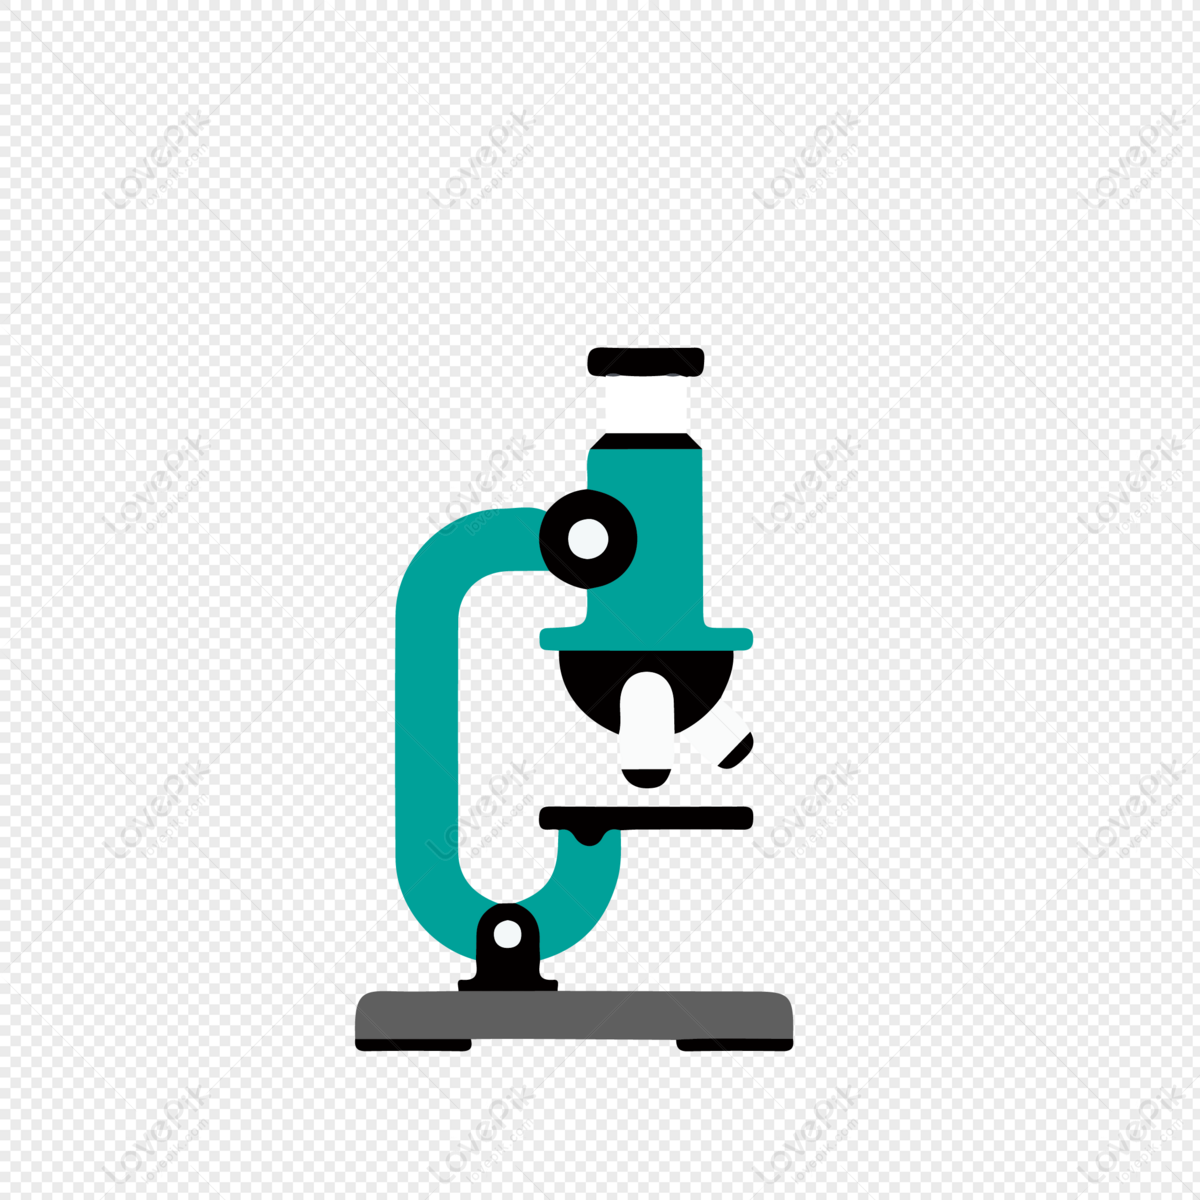 Microscope Free PNG And Clipart Image For Free Download - Lovepik |  400517129